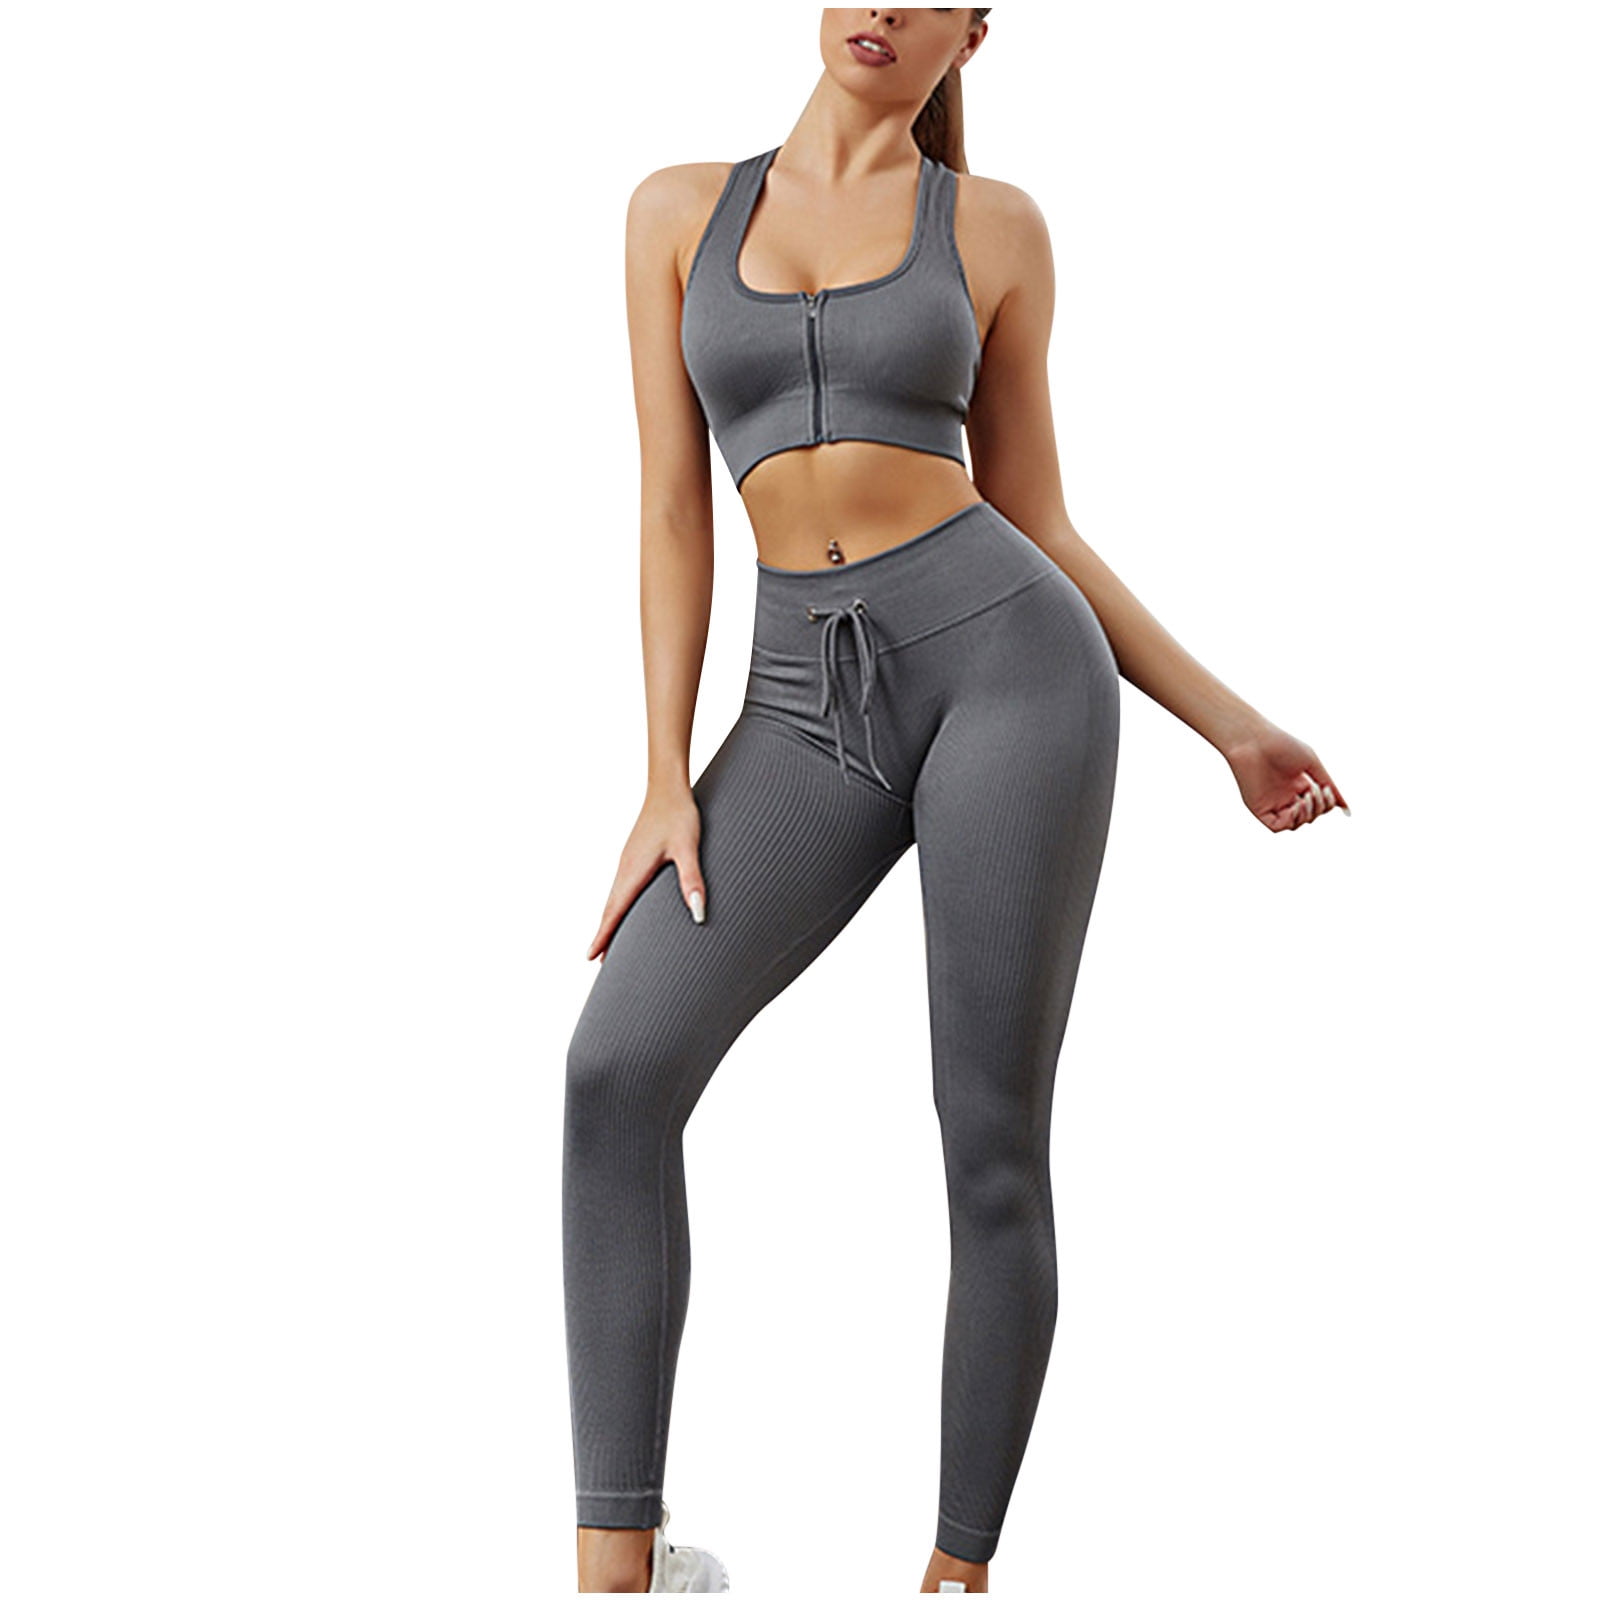 Workout Outfit for Women 2 Piece High Waist Drawstring Ribbed Leggings with  Zipper Sports Bra Gym Fitness Yoga Set Womens Clothes 